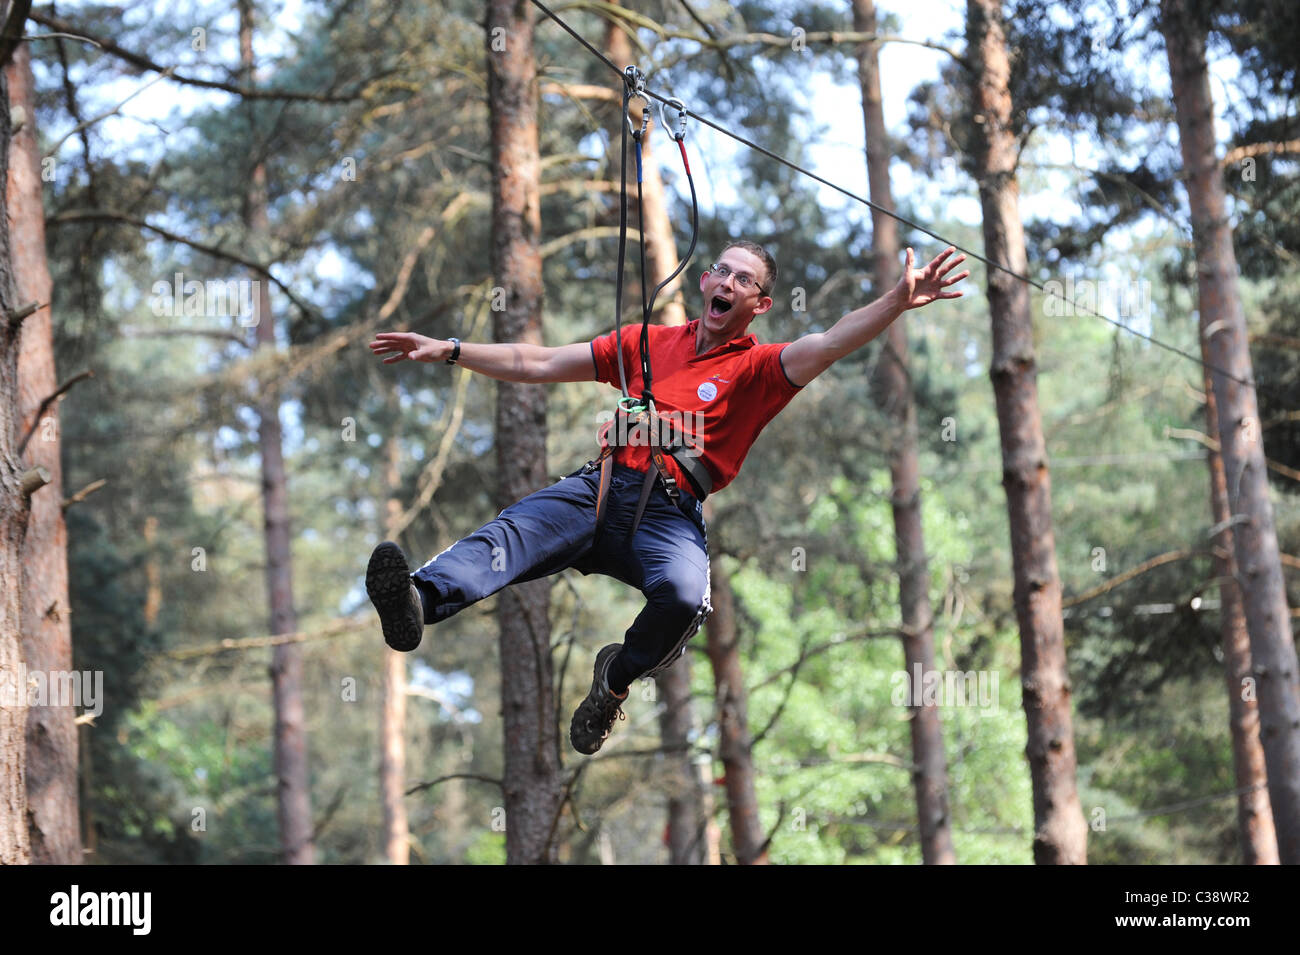 Man Riding The Zip Wire At Go Ape In Swinley Forest Near Bracknell England Uk Stock Photo Alamy